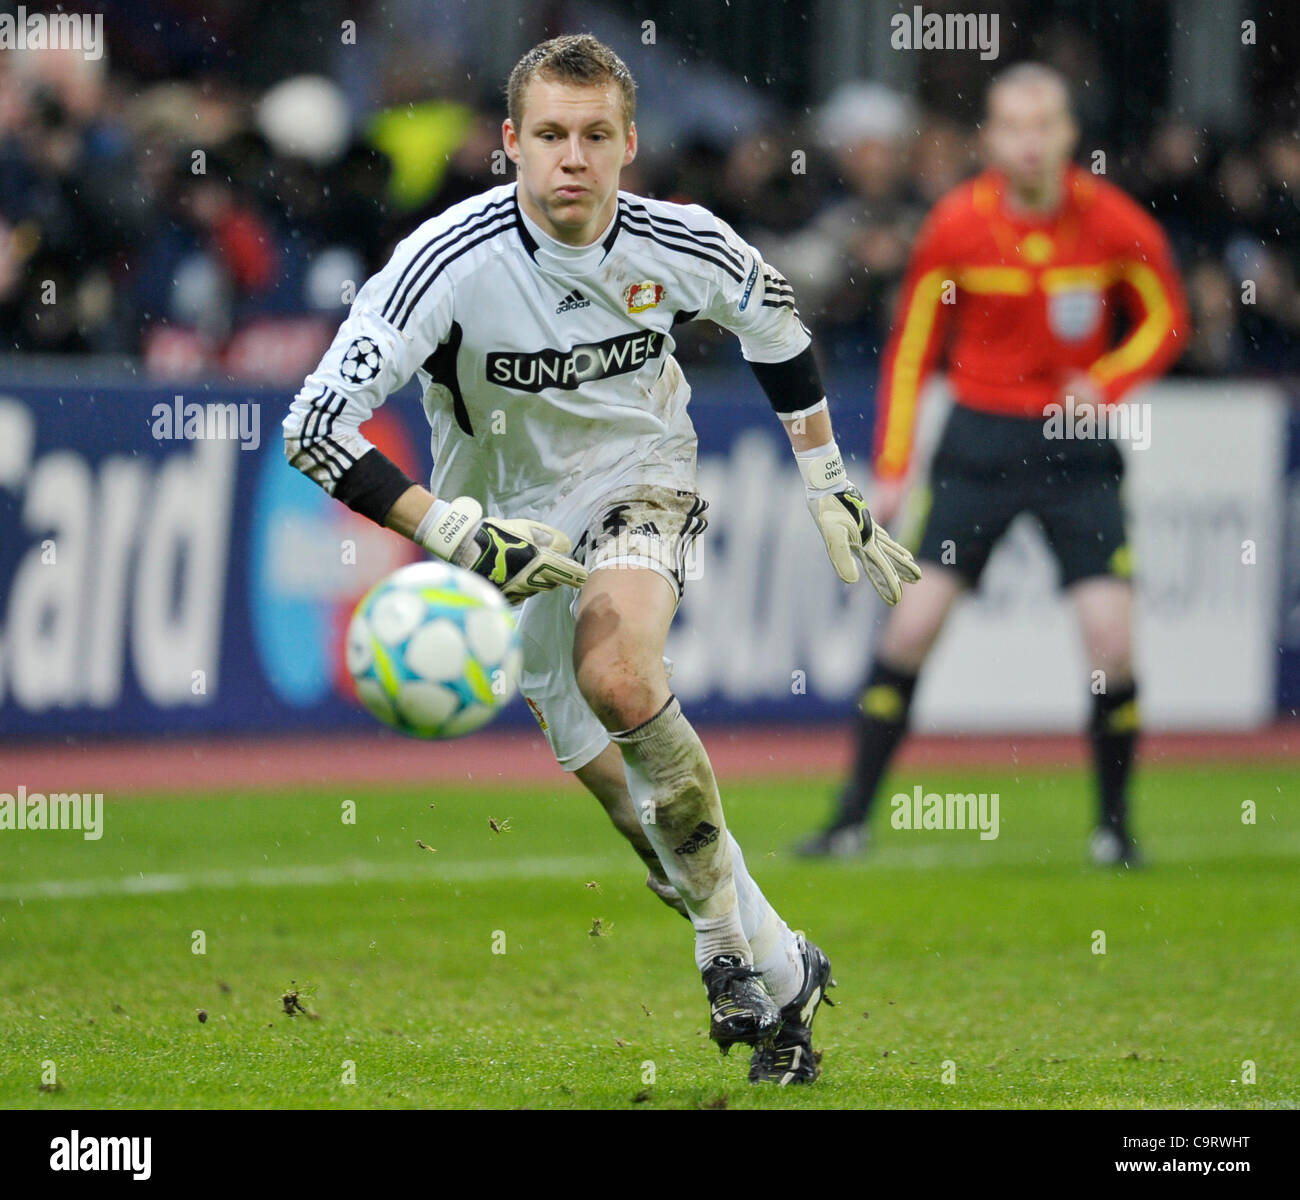 Fussball Torwart High Resolution Stock Photography and Images - Alamy